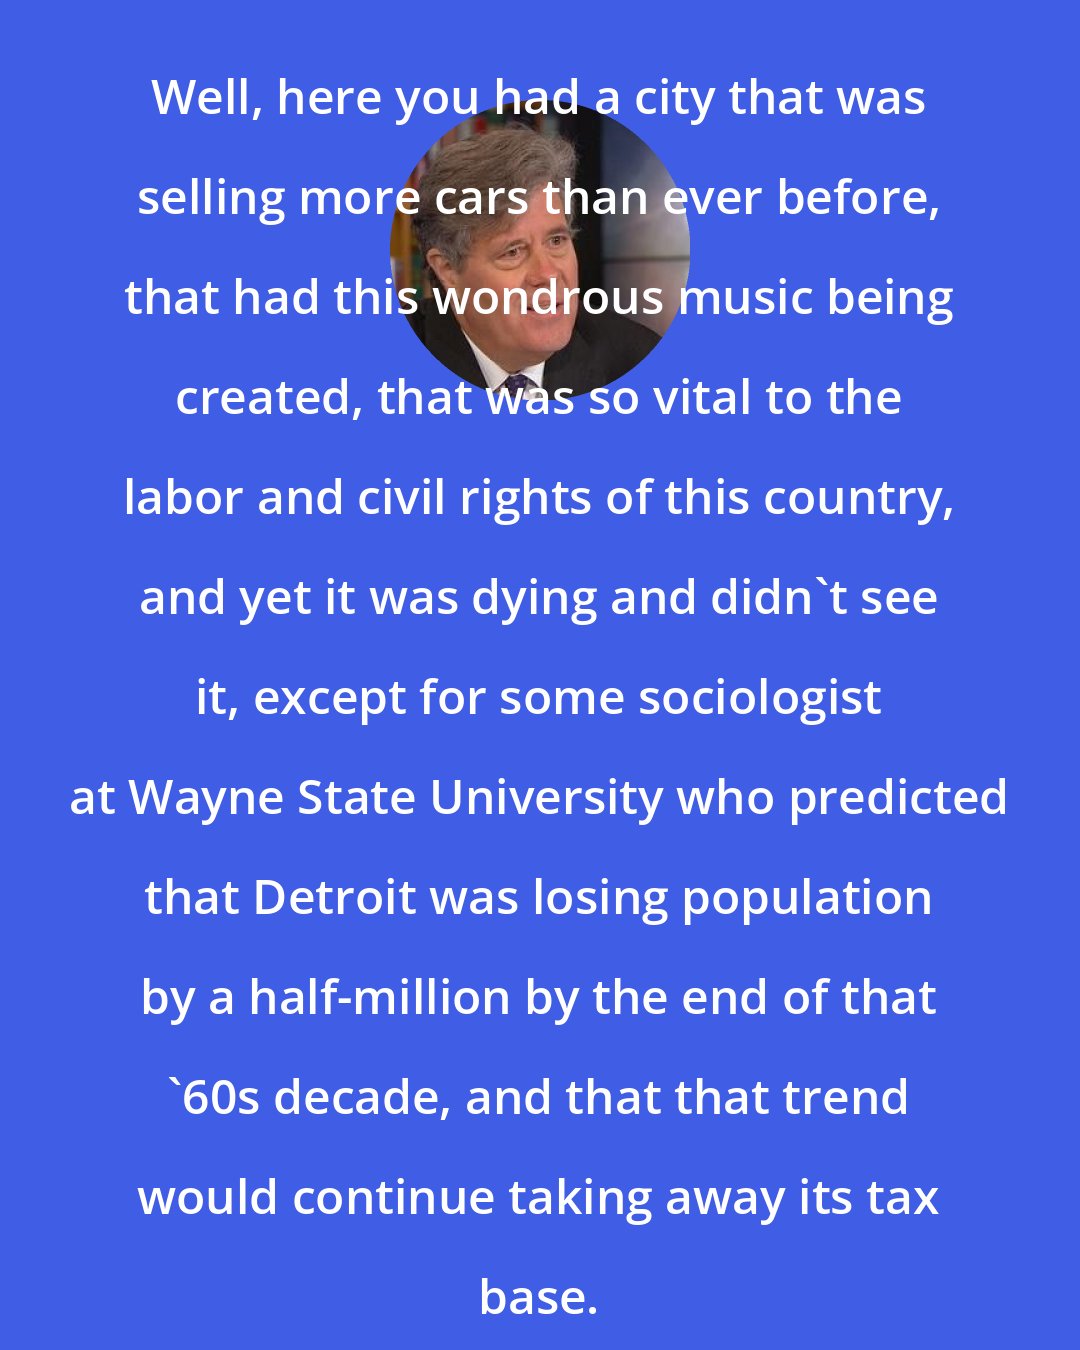 David Maraniss: Well, here you had a city that was selling more cars than ever before, that had this wondrous music being created, that was so vital to the labor and civil rights of this country, and yet it was dying and didn't see it, except for some sociologist at Wayne State University who predicted that Detroit was losing population by a half-million by the end of that '60s decade, and that that trend would continue taking away its tax base.